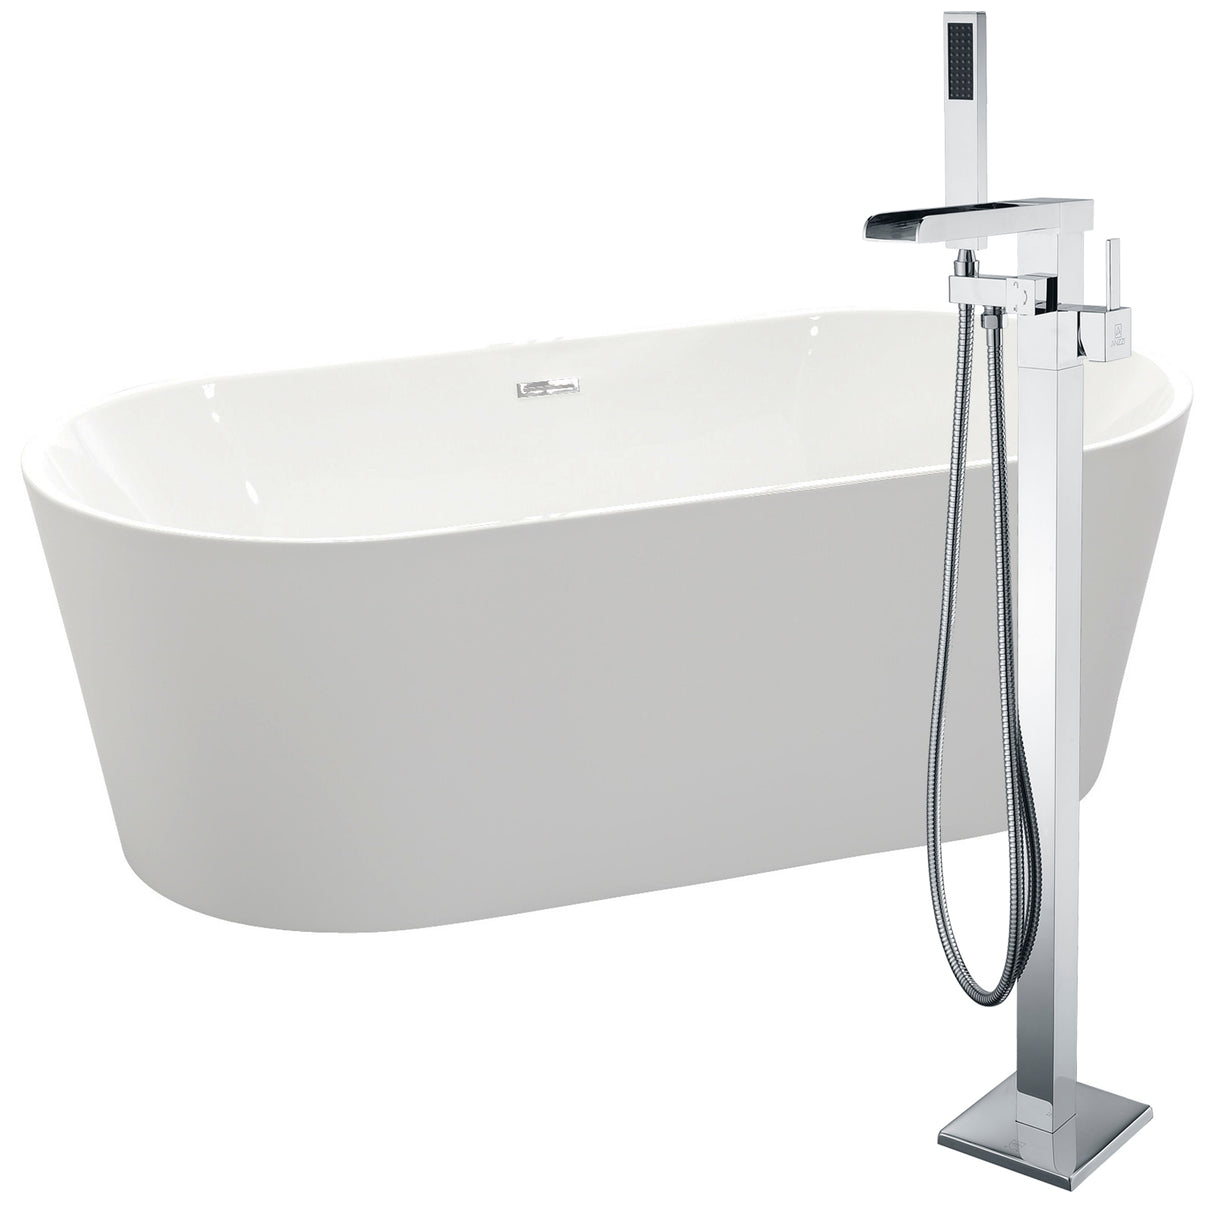 ANZZI FTAZ098-0059C Chand 67 in. Acrylic Flatbottom Non-Whirlpool Bathtub in White with Union Faucet in Polished Chrome